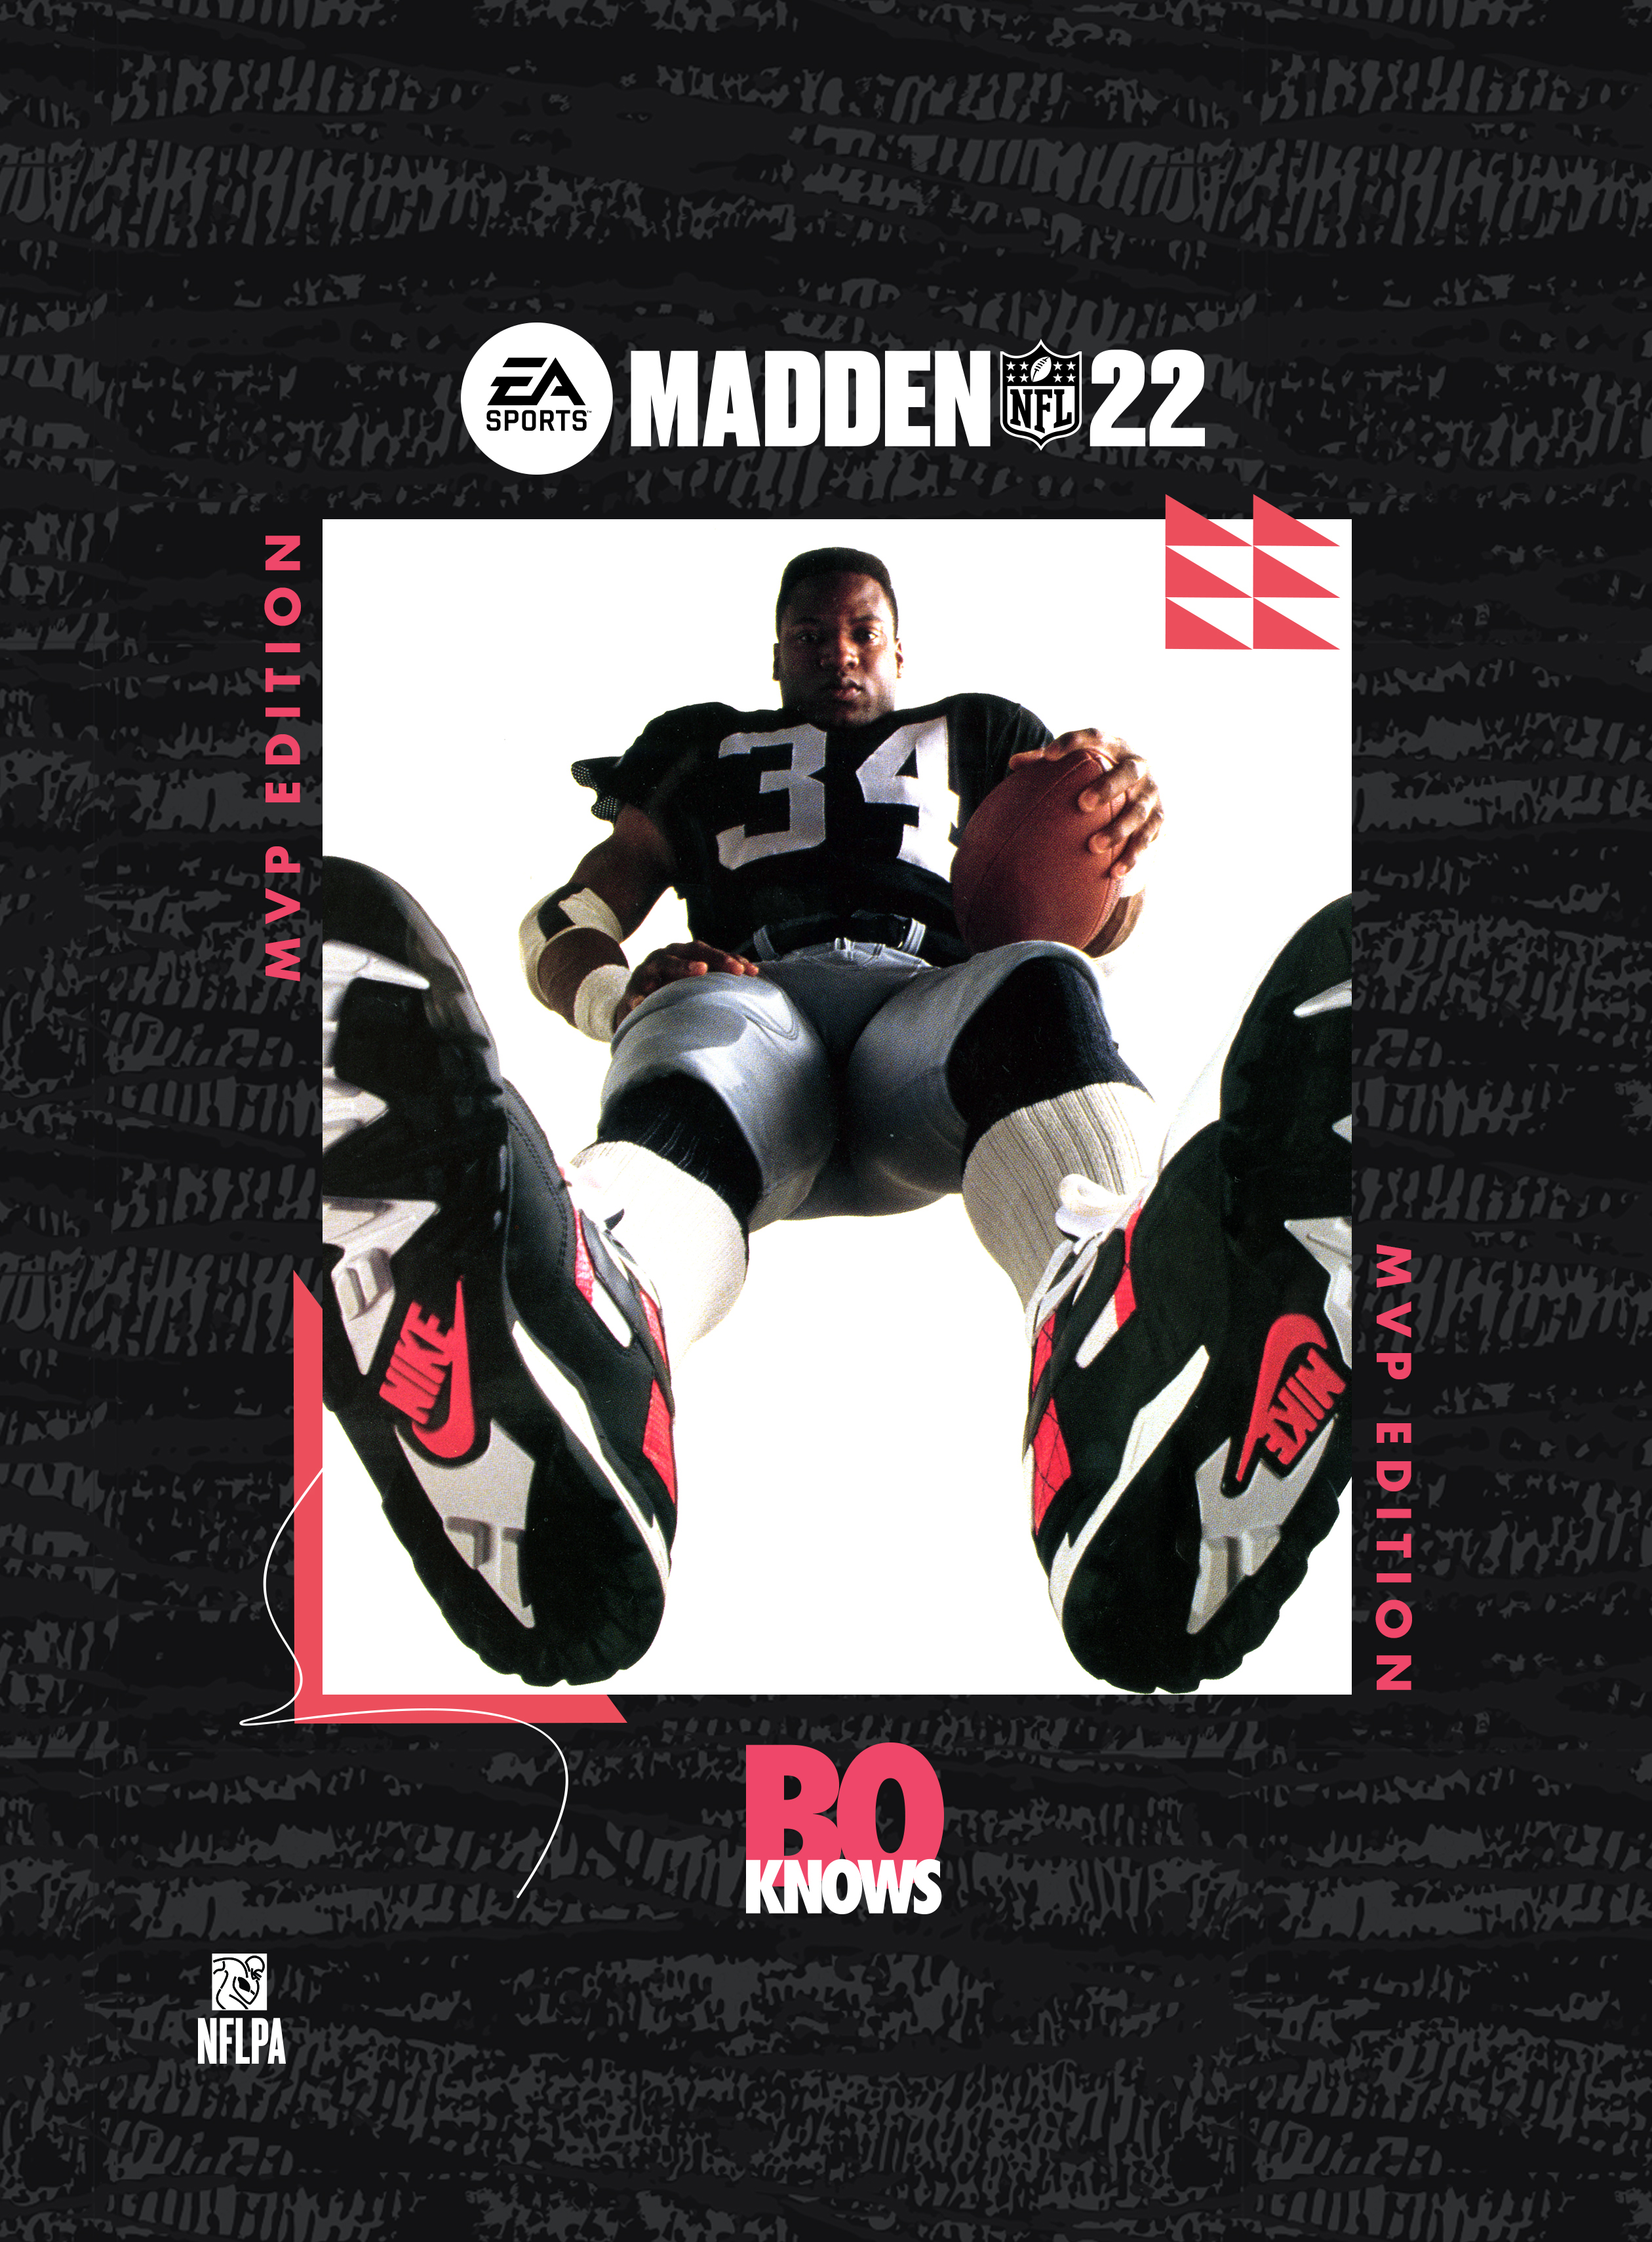 Electronic Arts Reveals New Madden NFL 22 Digital Cover Featuring